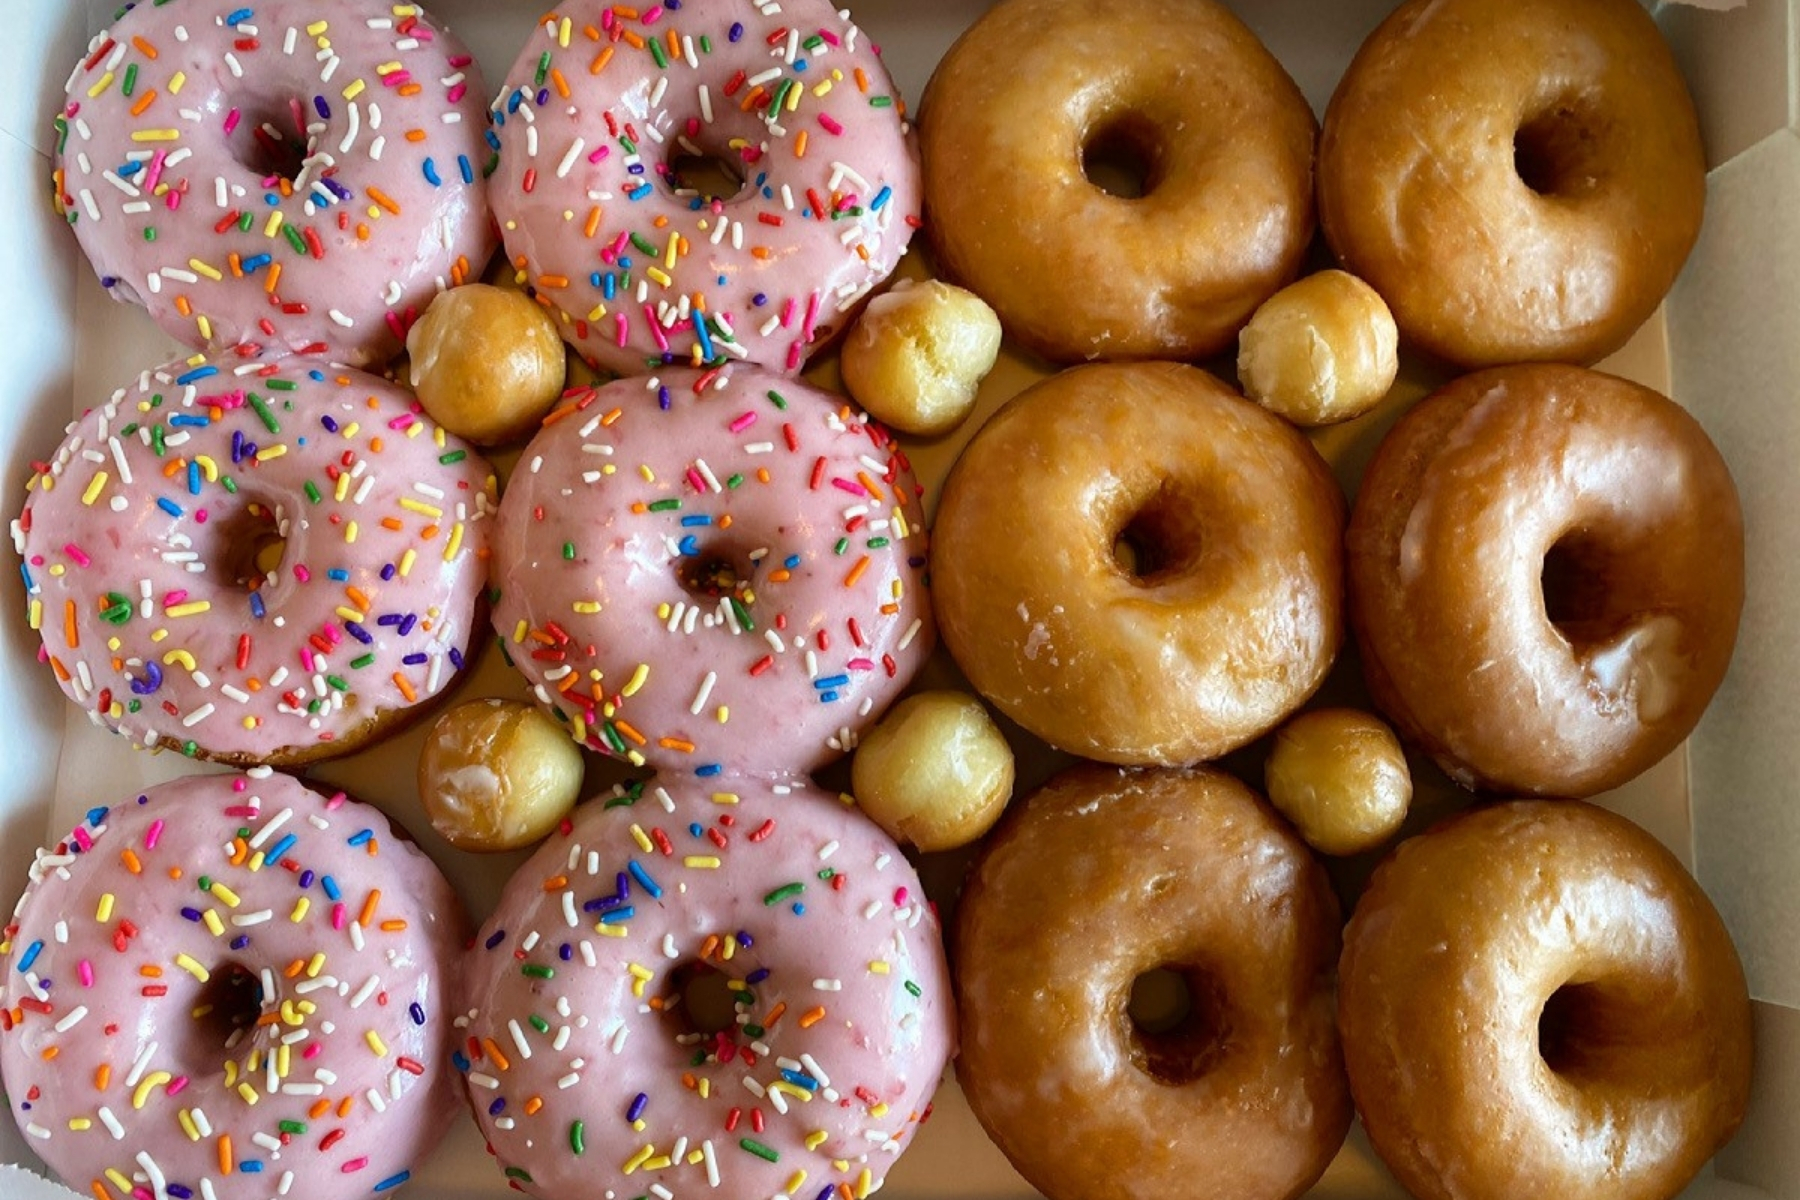 A box of vegan doughnuts. A half dozen pink doughnuts with sprinkles, and the other half dozen are plain glazed.